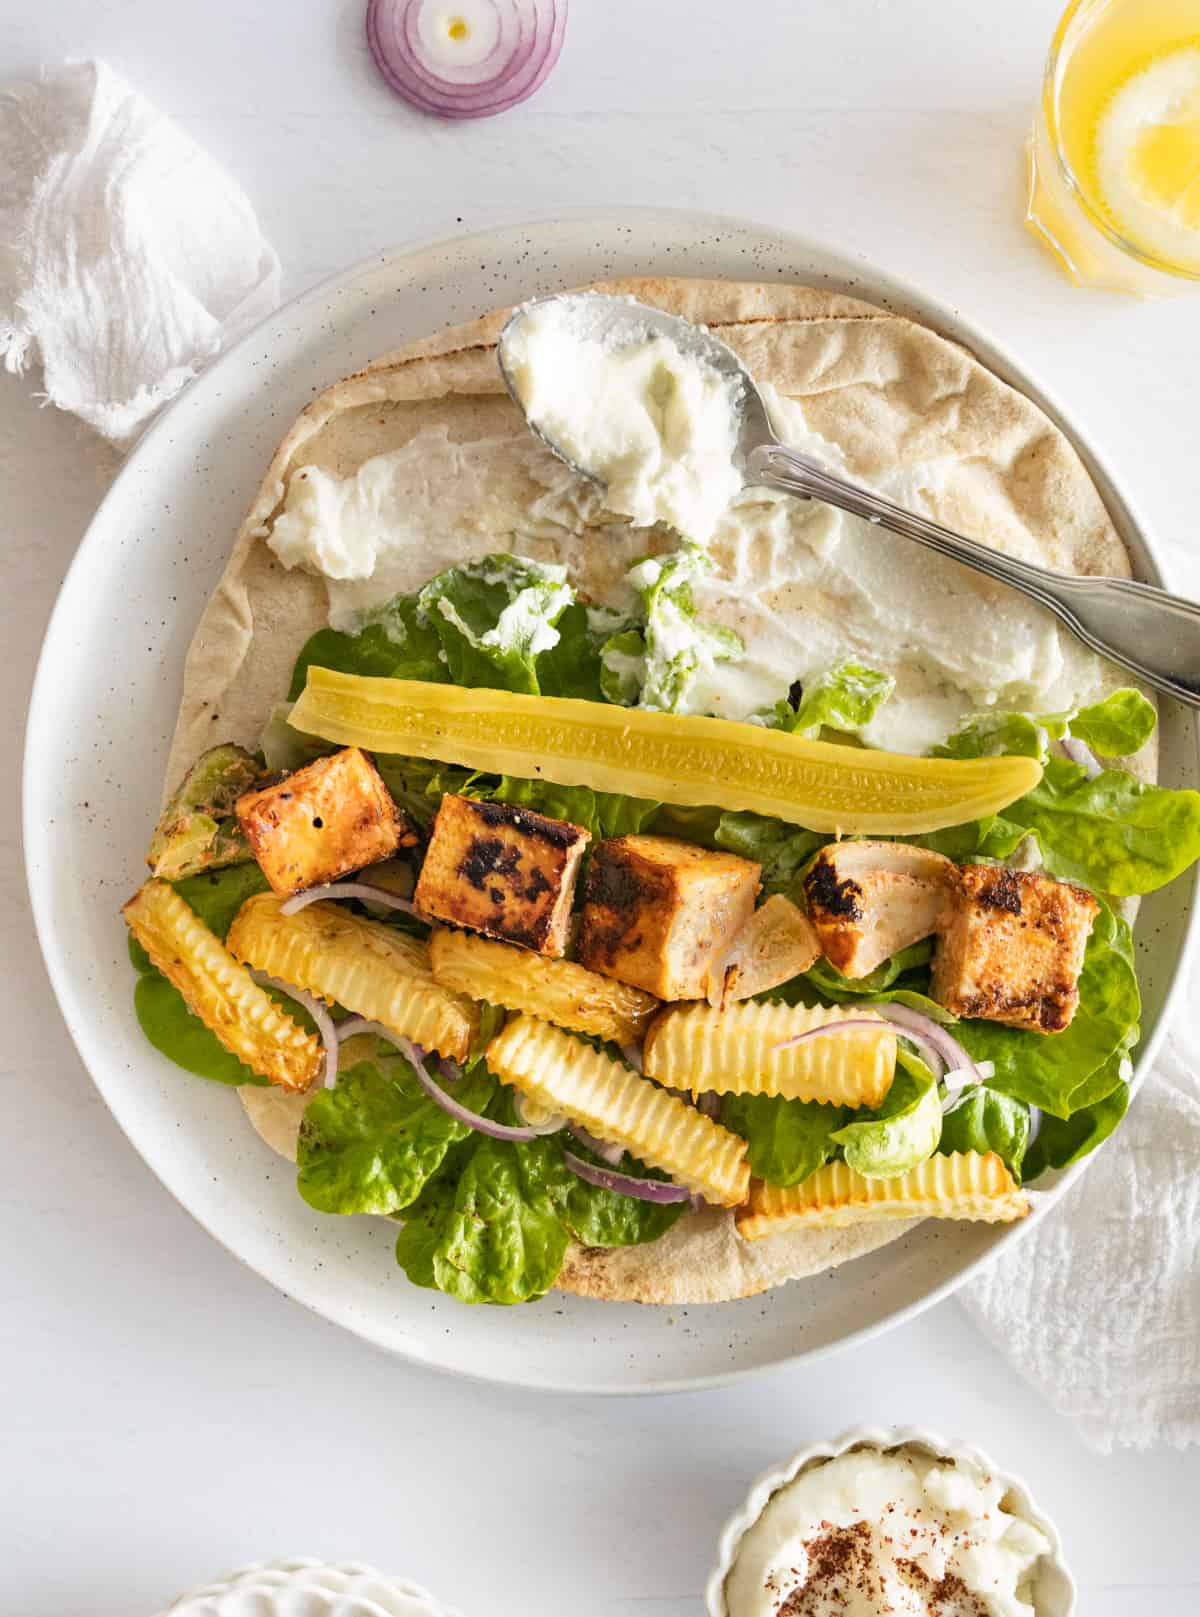 pieces of grilled tofu, with lettuce, fries, pickles cucumber and garlic sauce in pita bread